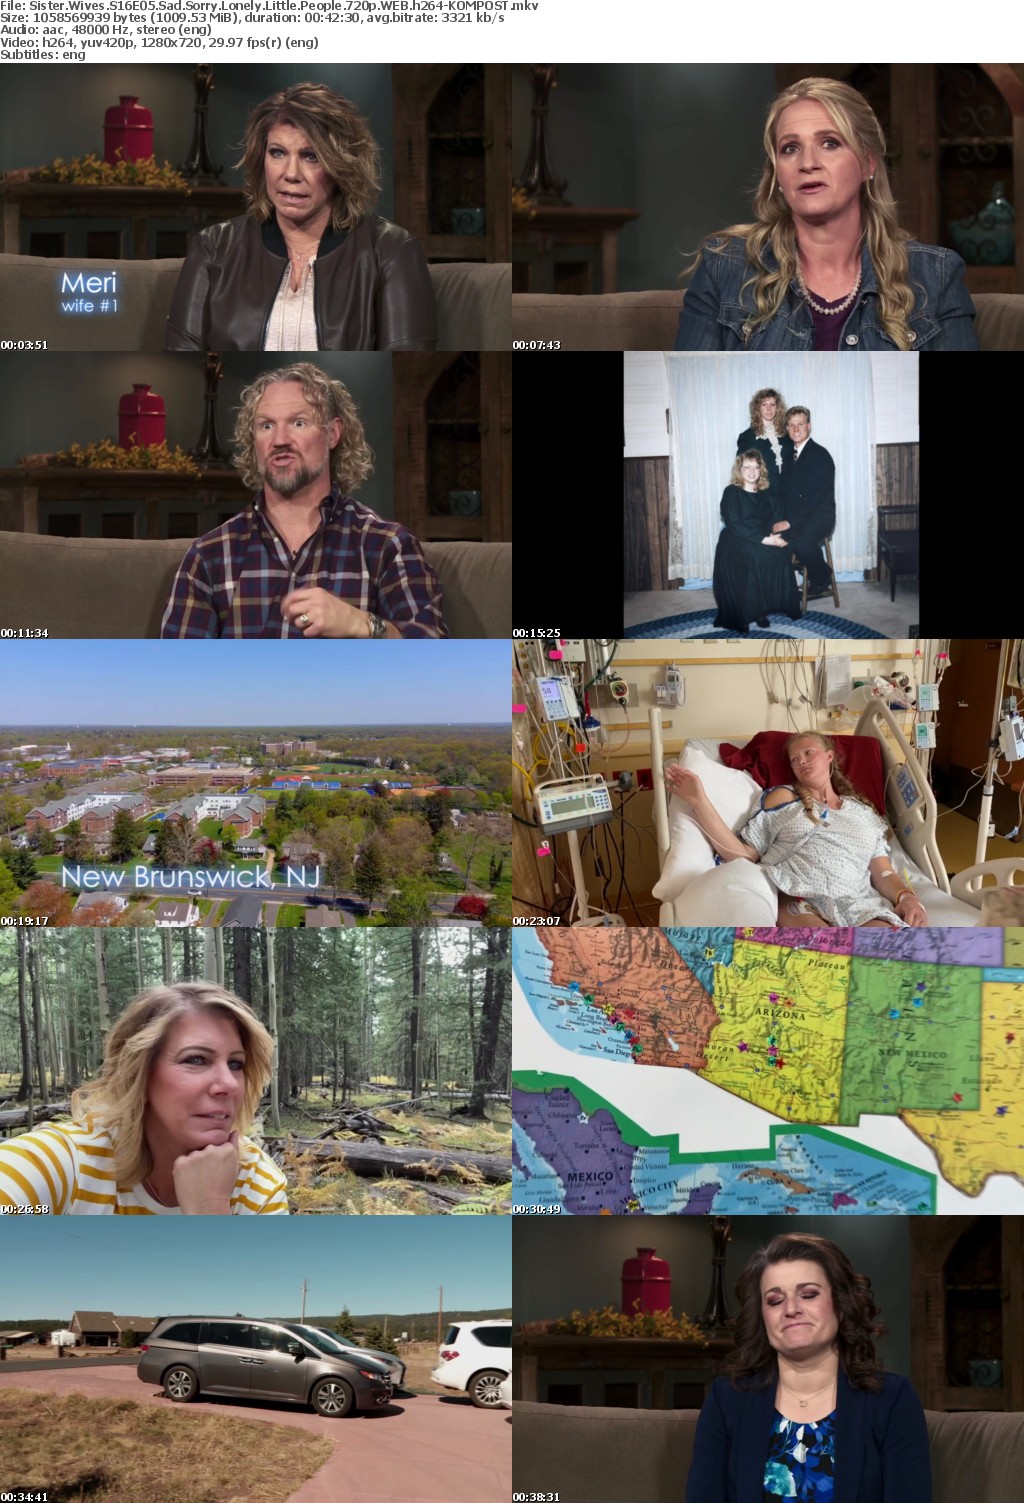 Sister Wives S16E05 Sad Sorry Lonely Little People 720p WEB h264-KOMPOST